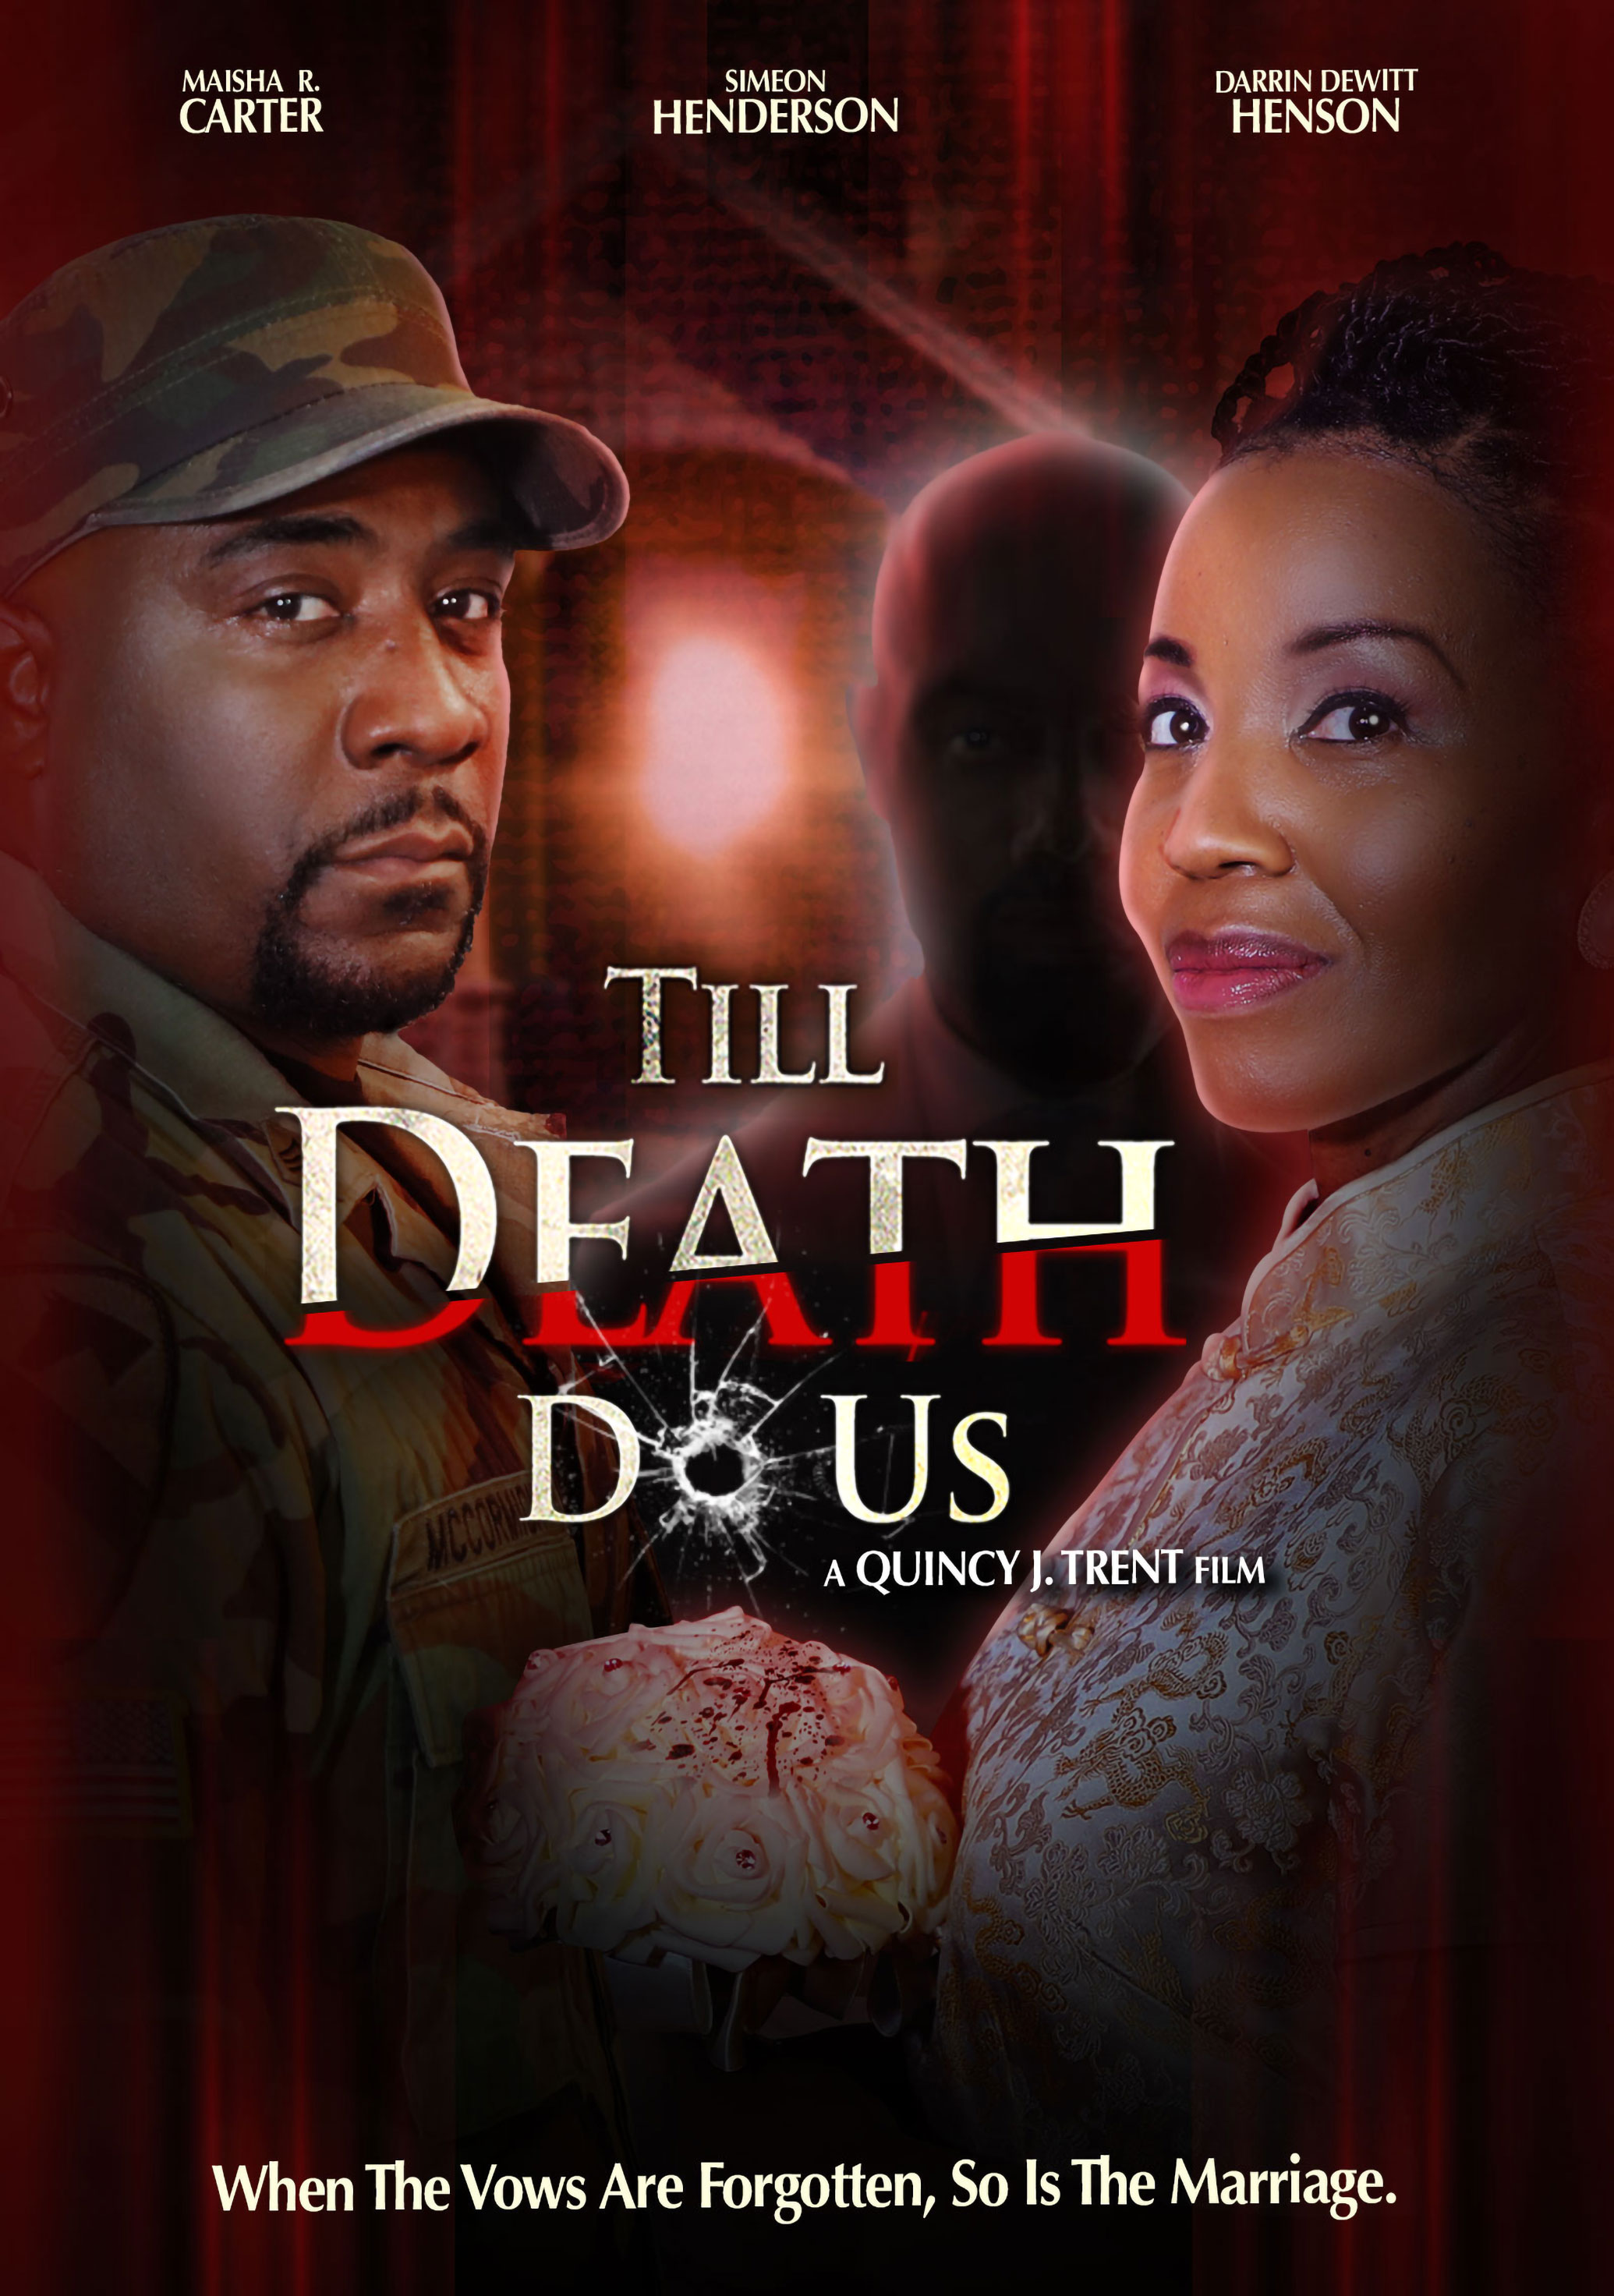 Till Death Do Us (2022) Romance, Directed By Quincy J. Trent